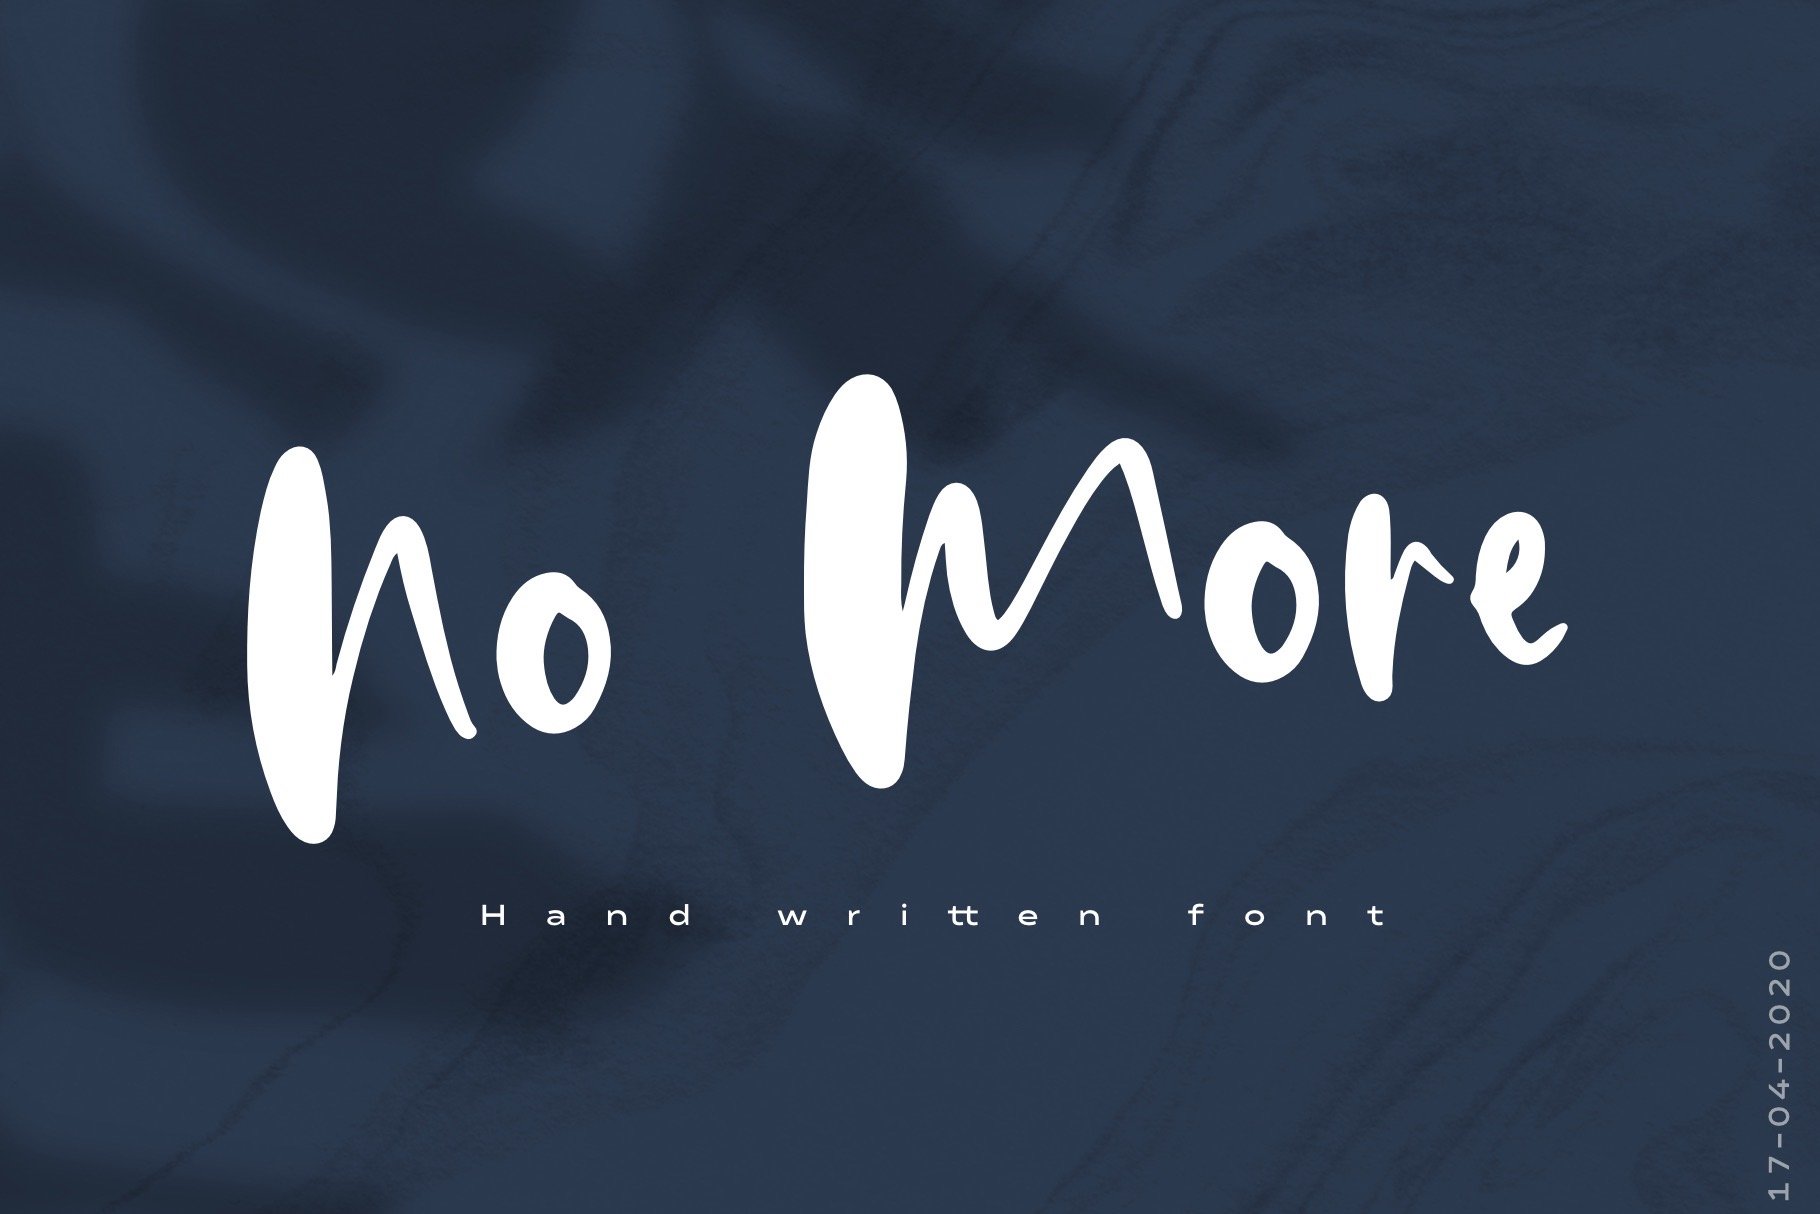 No More | Hand Written Font cover image.